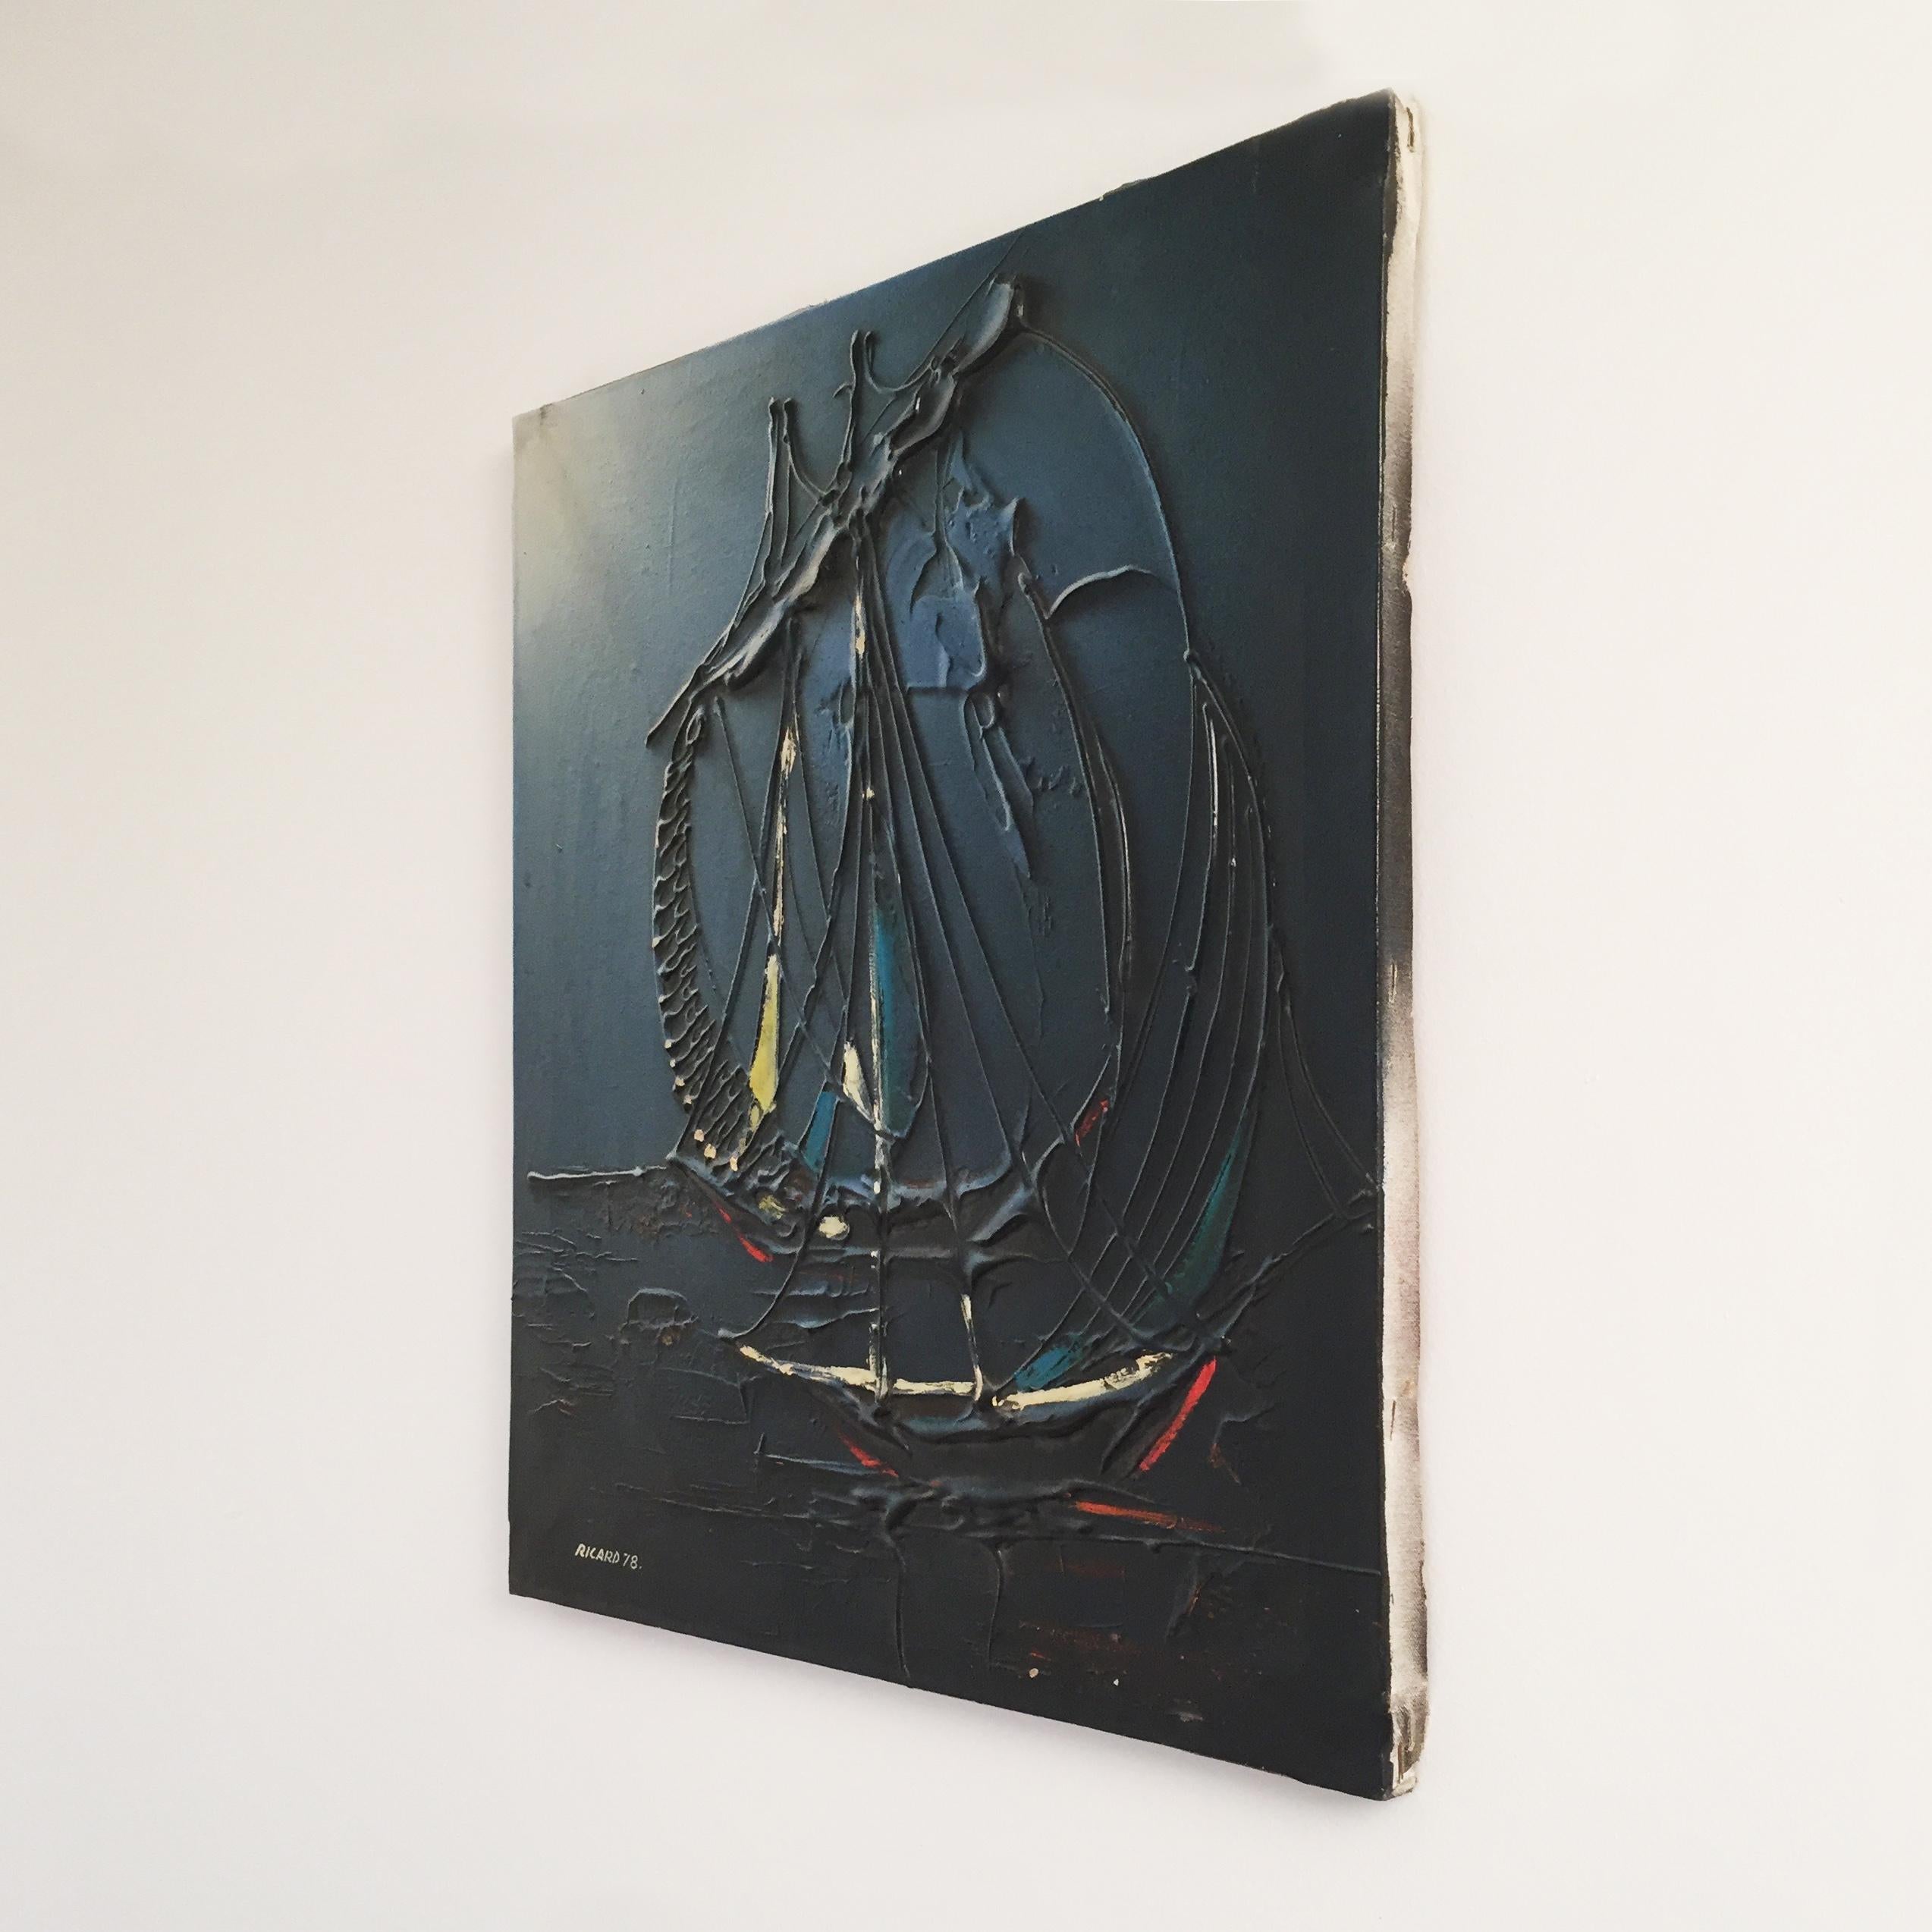 Alluring acrylic on canvas painting of an abstract ship in the night, with deep blue and black hues. The acrylic paint is embossed in places, giving it a depth of texture. Signed 